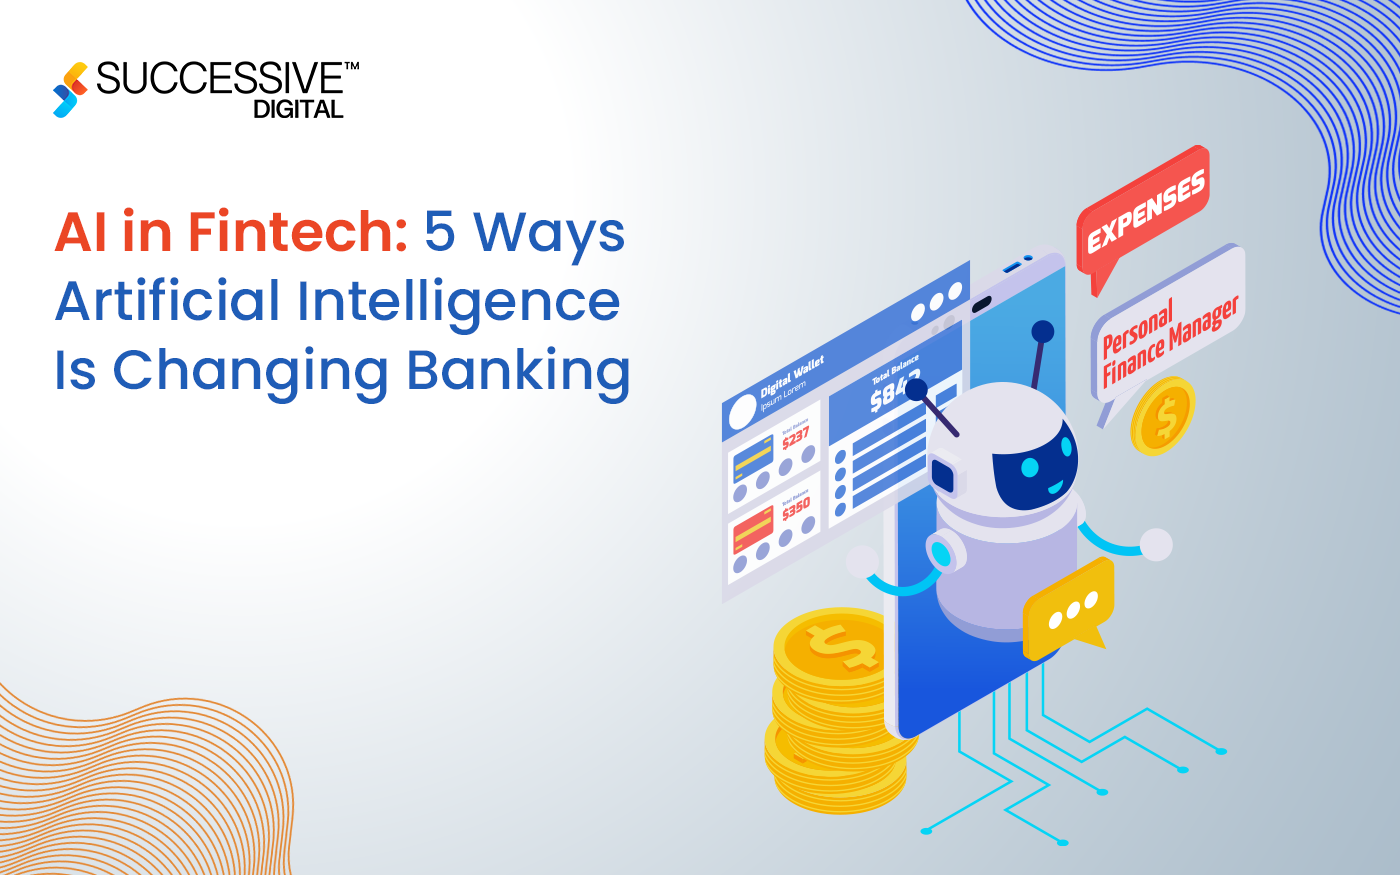 AI in Fintech. 5 Ways Artificial Intelligence Is Changing Banking